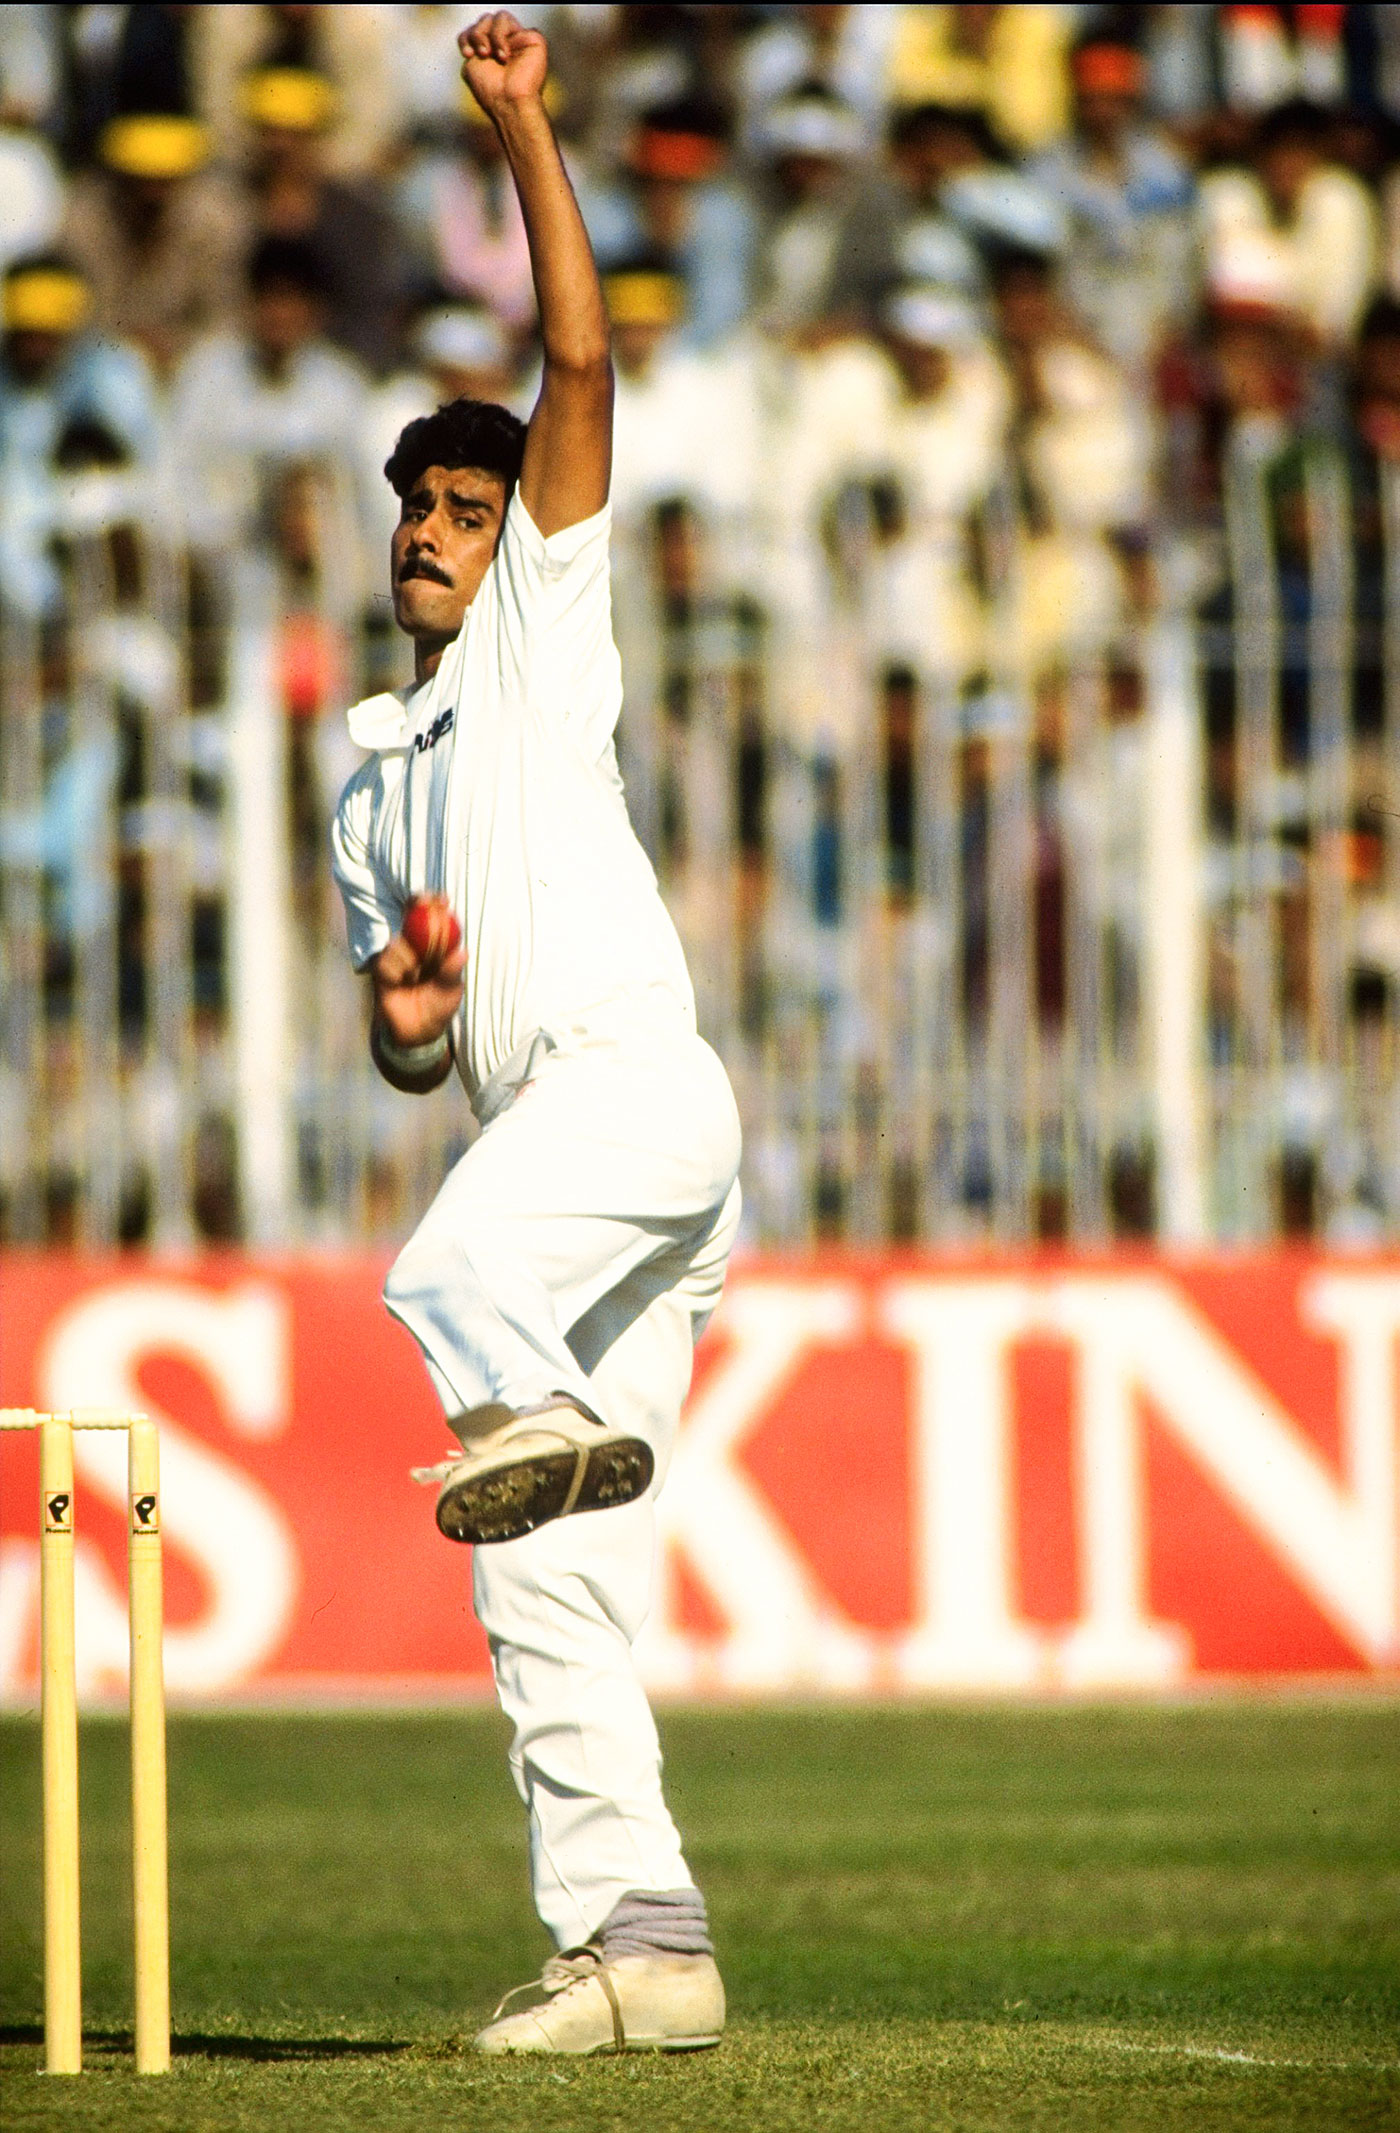 Waqar Younis also made his Pakistan debut during that series in 1989